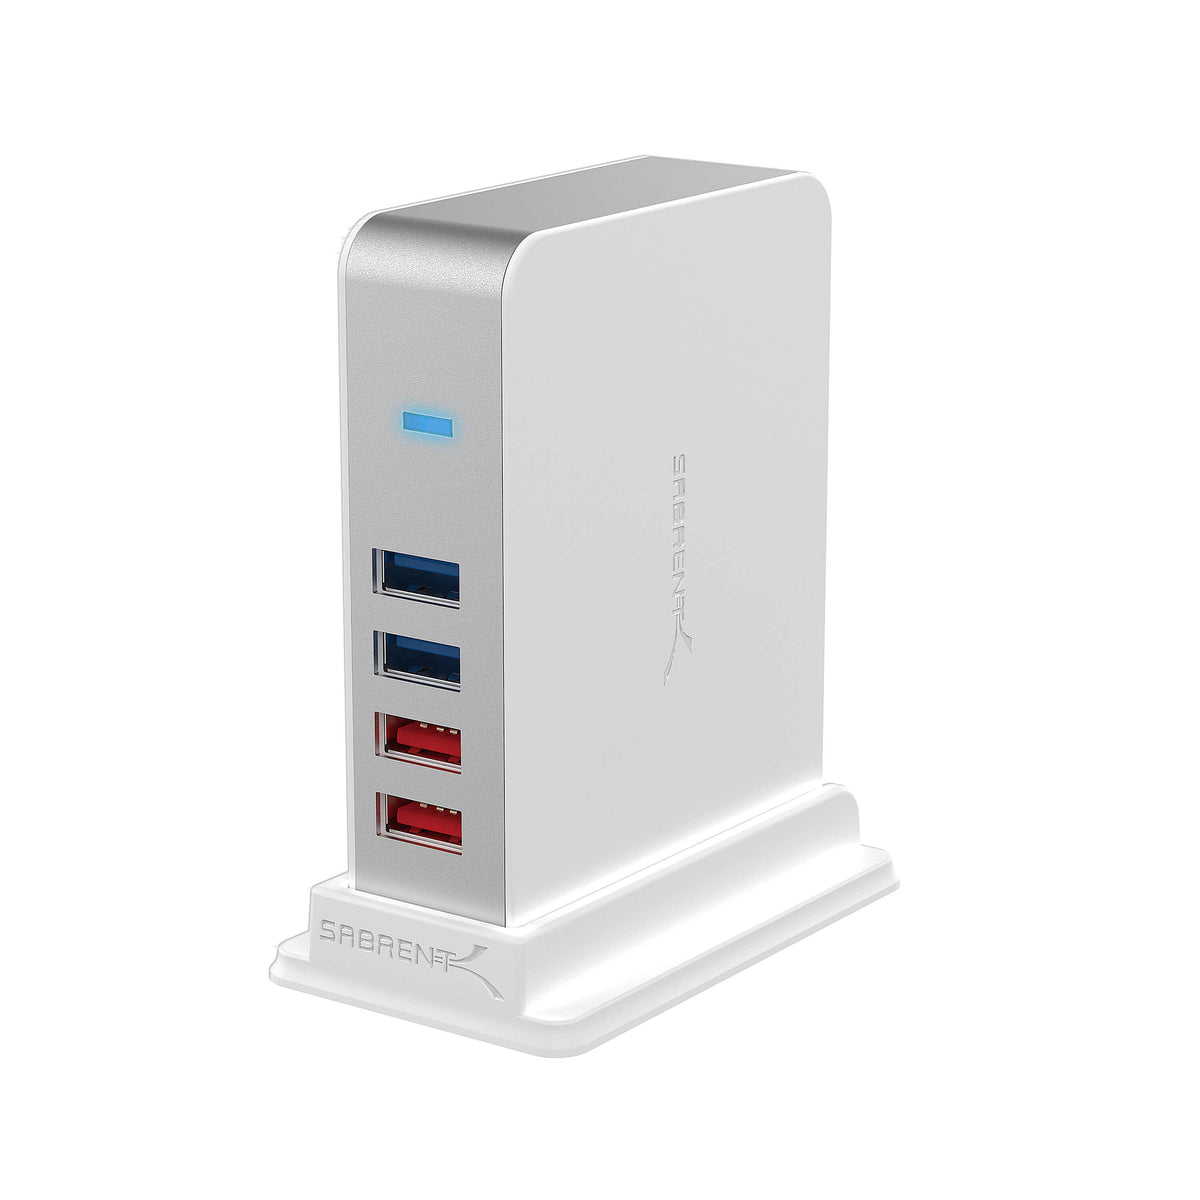 7 Port USB 3.0 HUB + 2 Charging Ports with 12V/4A Power Adapter [White]